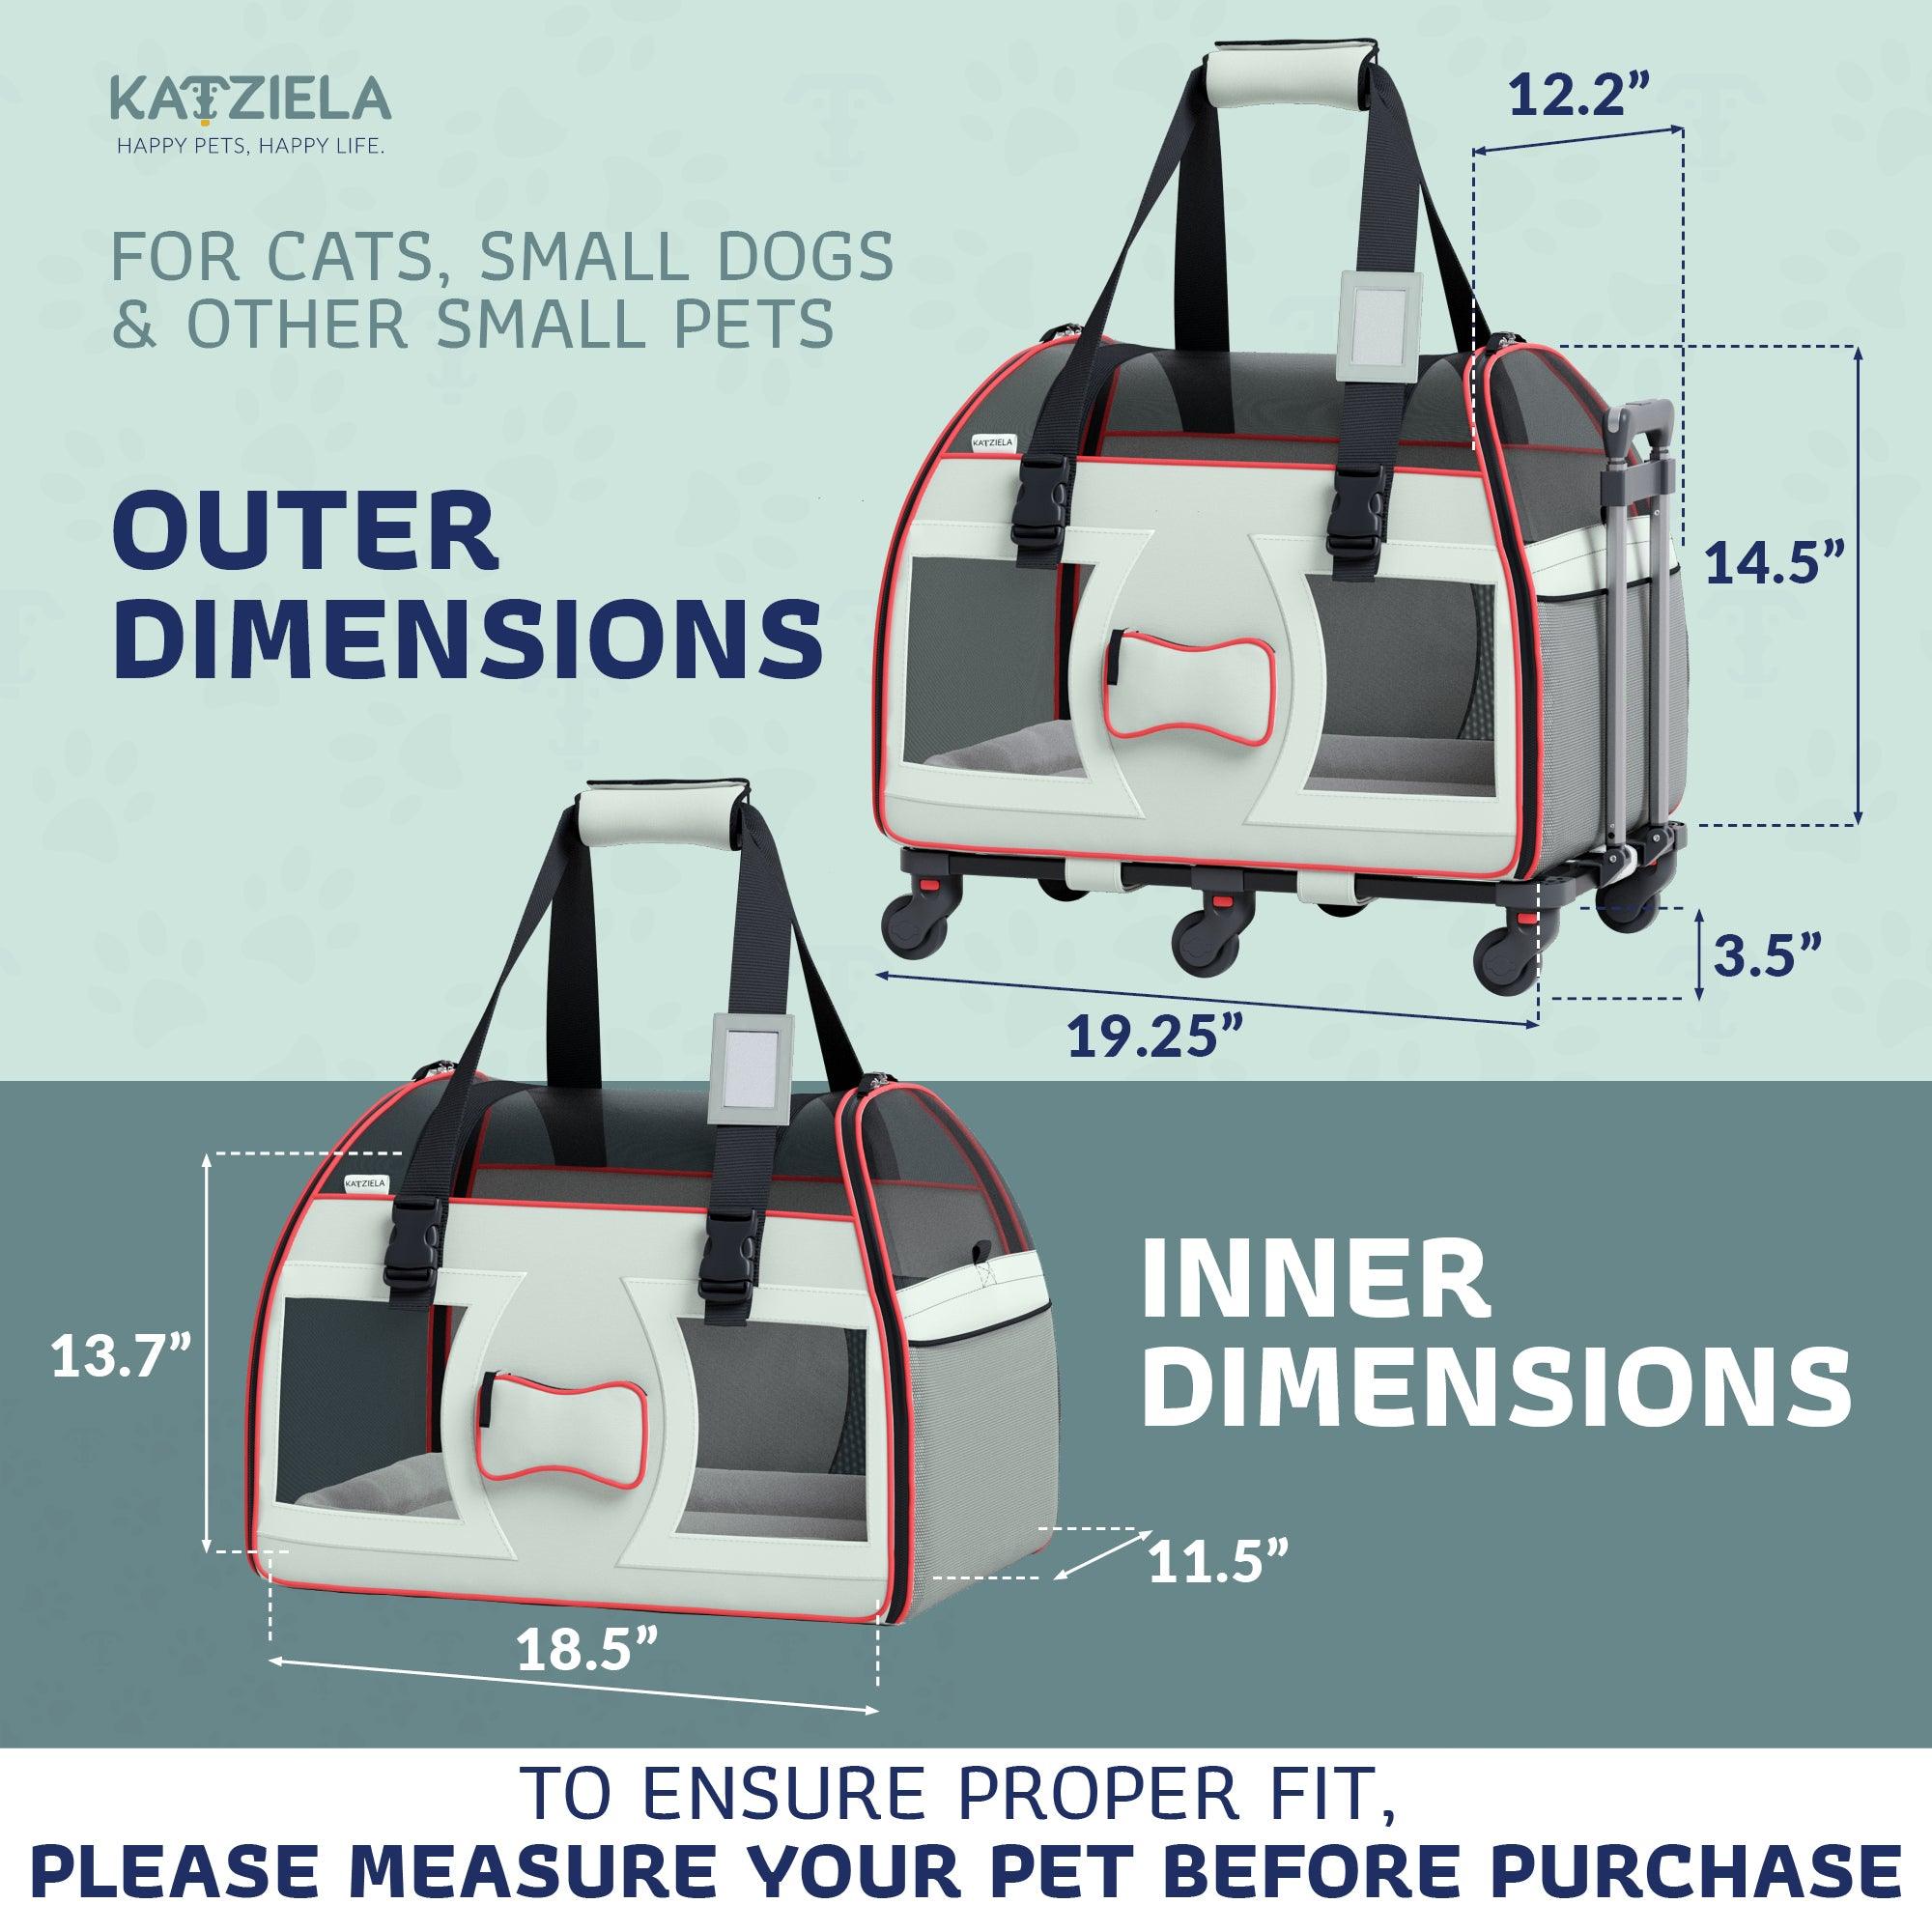 Pet Life Wheeled Airline Approved Travel Pet Carrier 